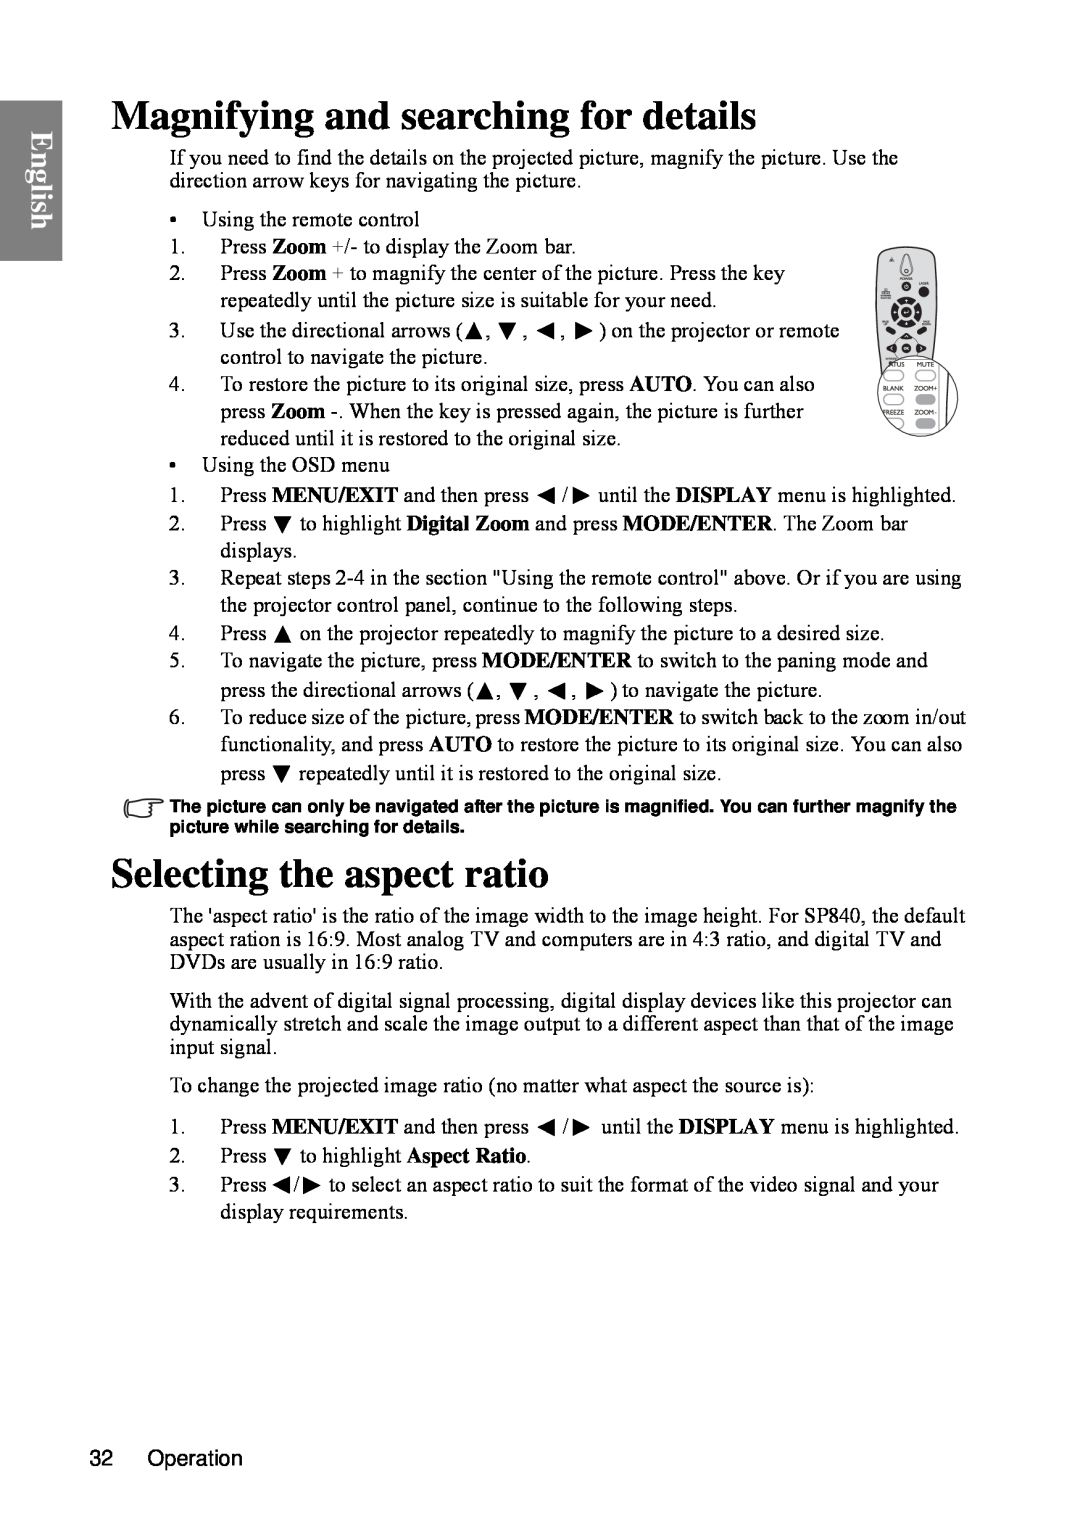 BenQ SP840 user manual Magnifying and searching for details, Selecting the aspect ratio, English, Operation 